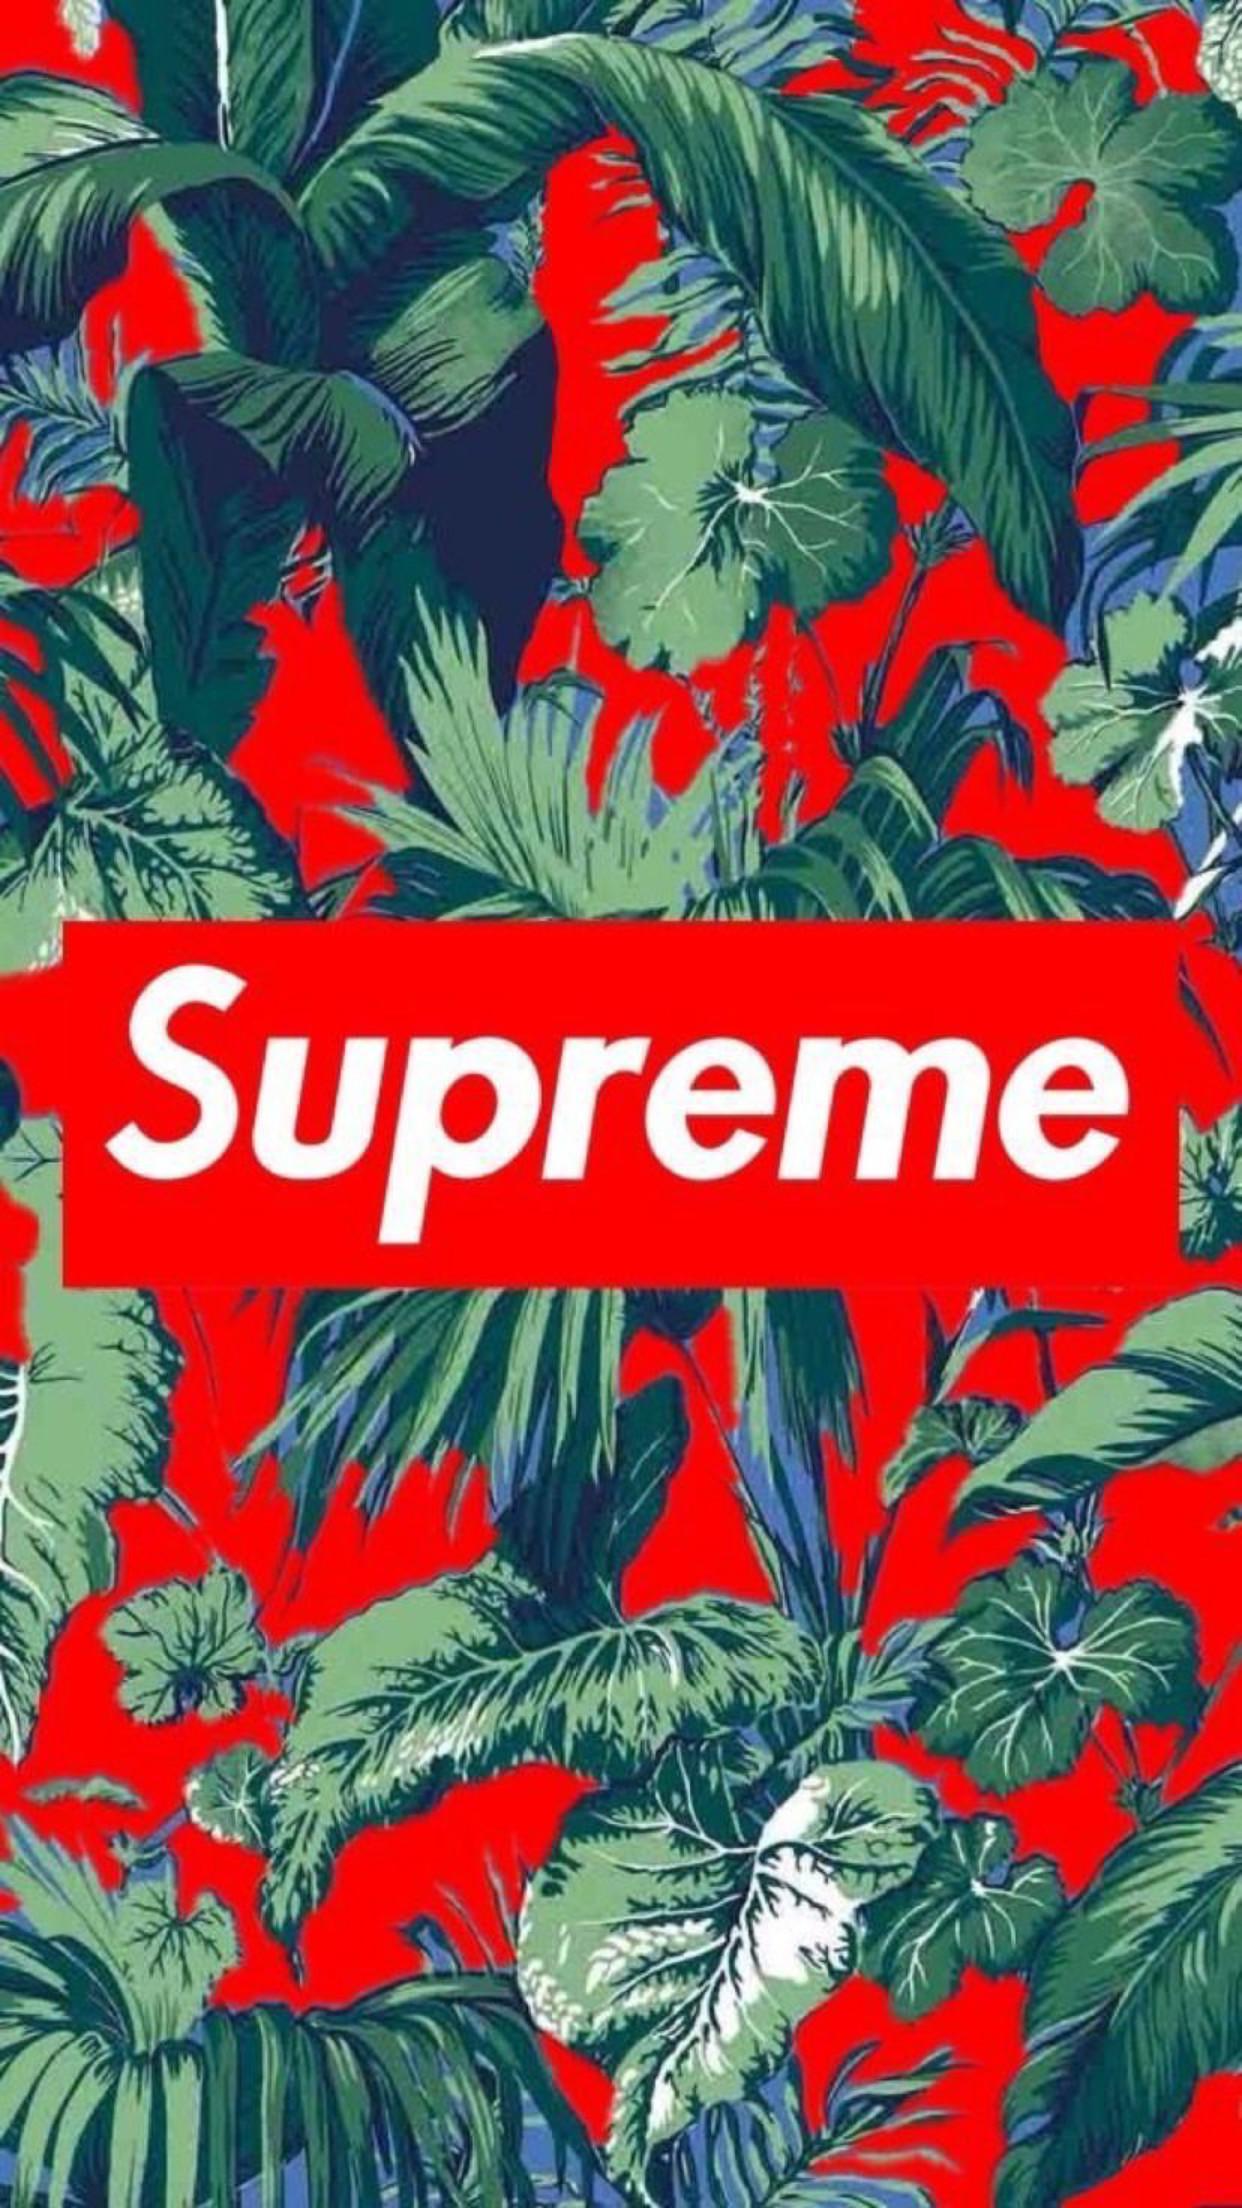 Supreme iphone xr HD wallpapers